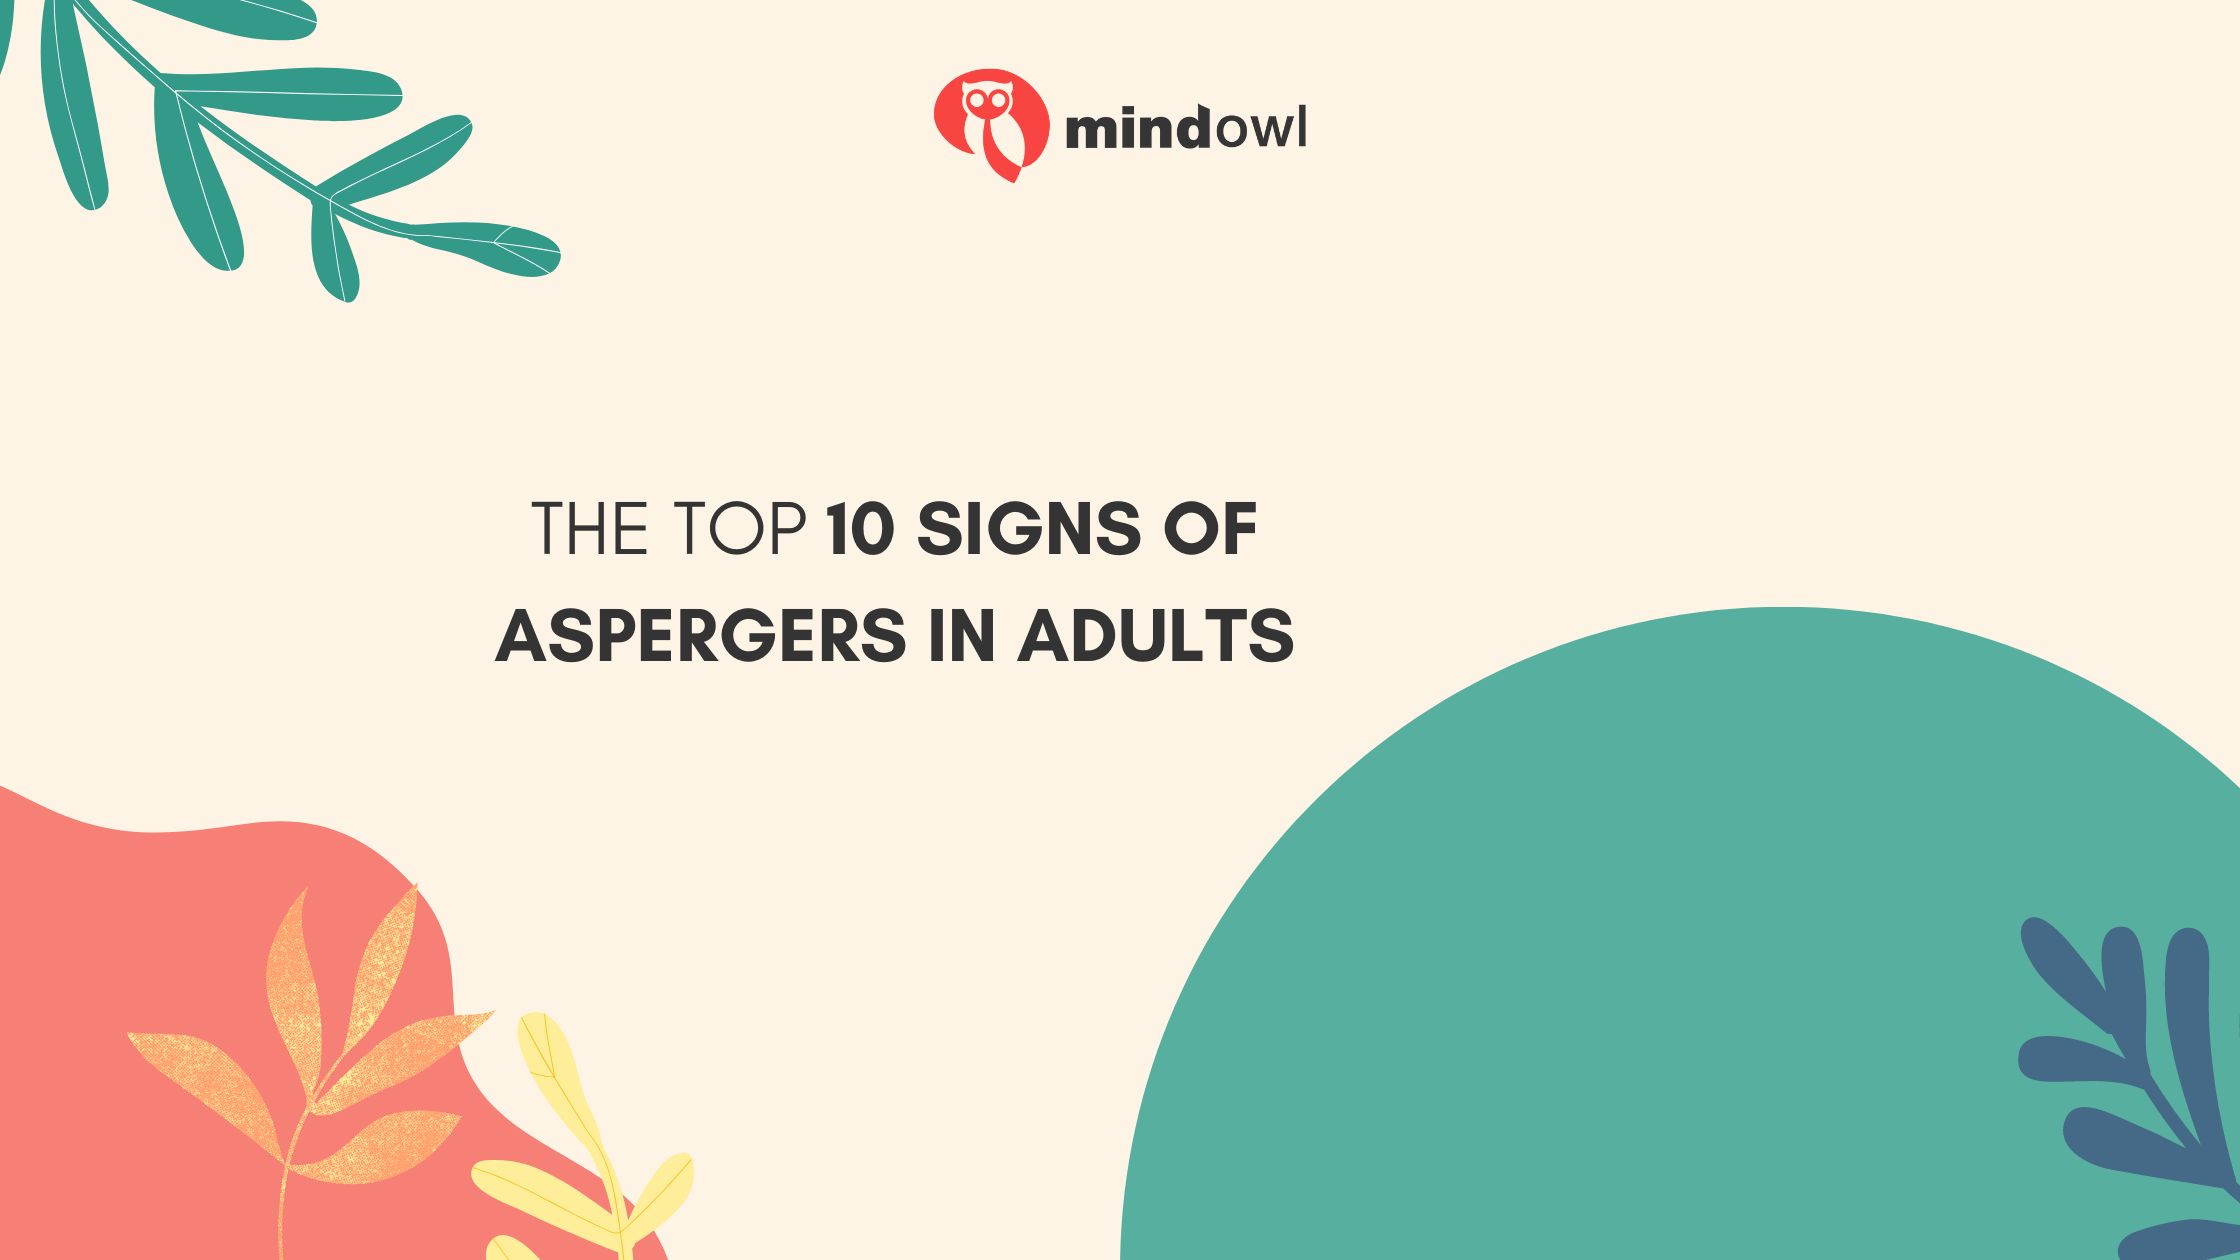 The Top 10 Signs Of Aspergers In Adults: Understanding The Key Symptoms And Behaviors